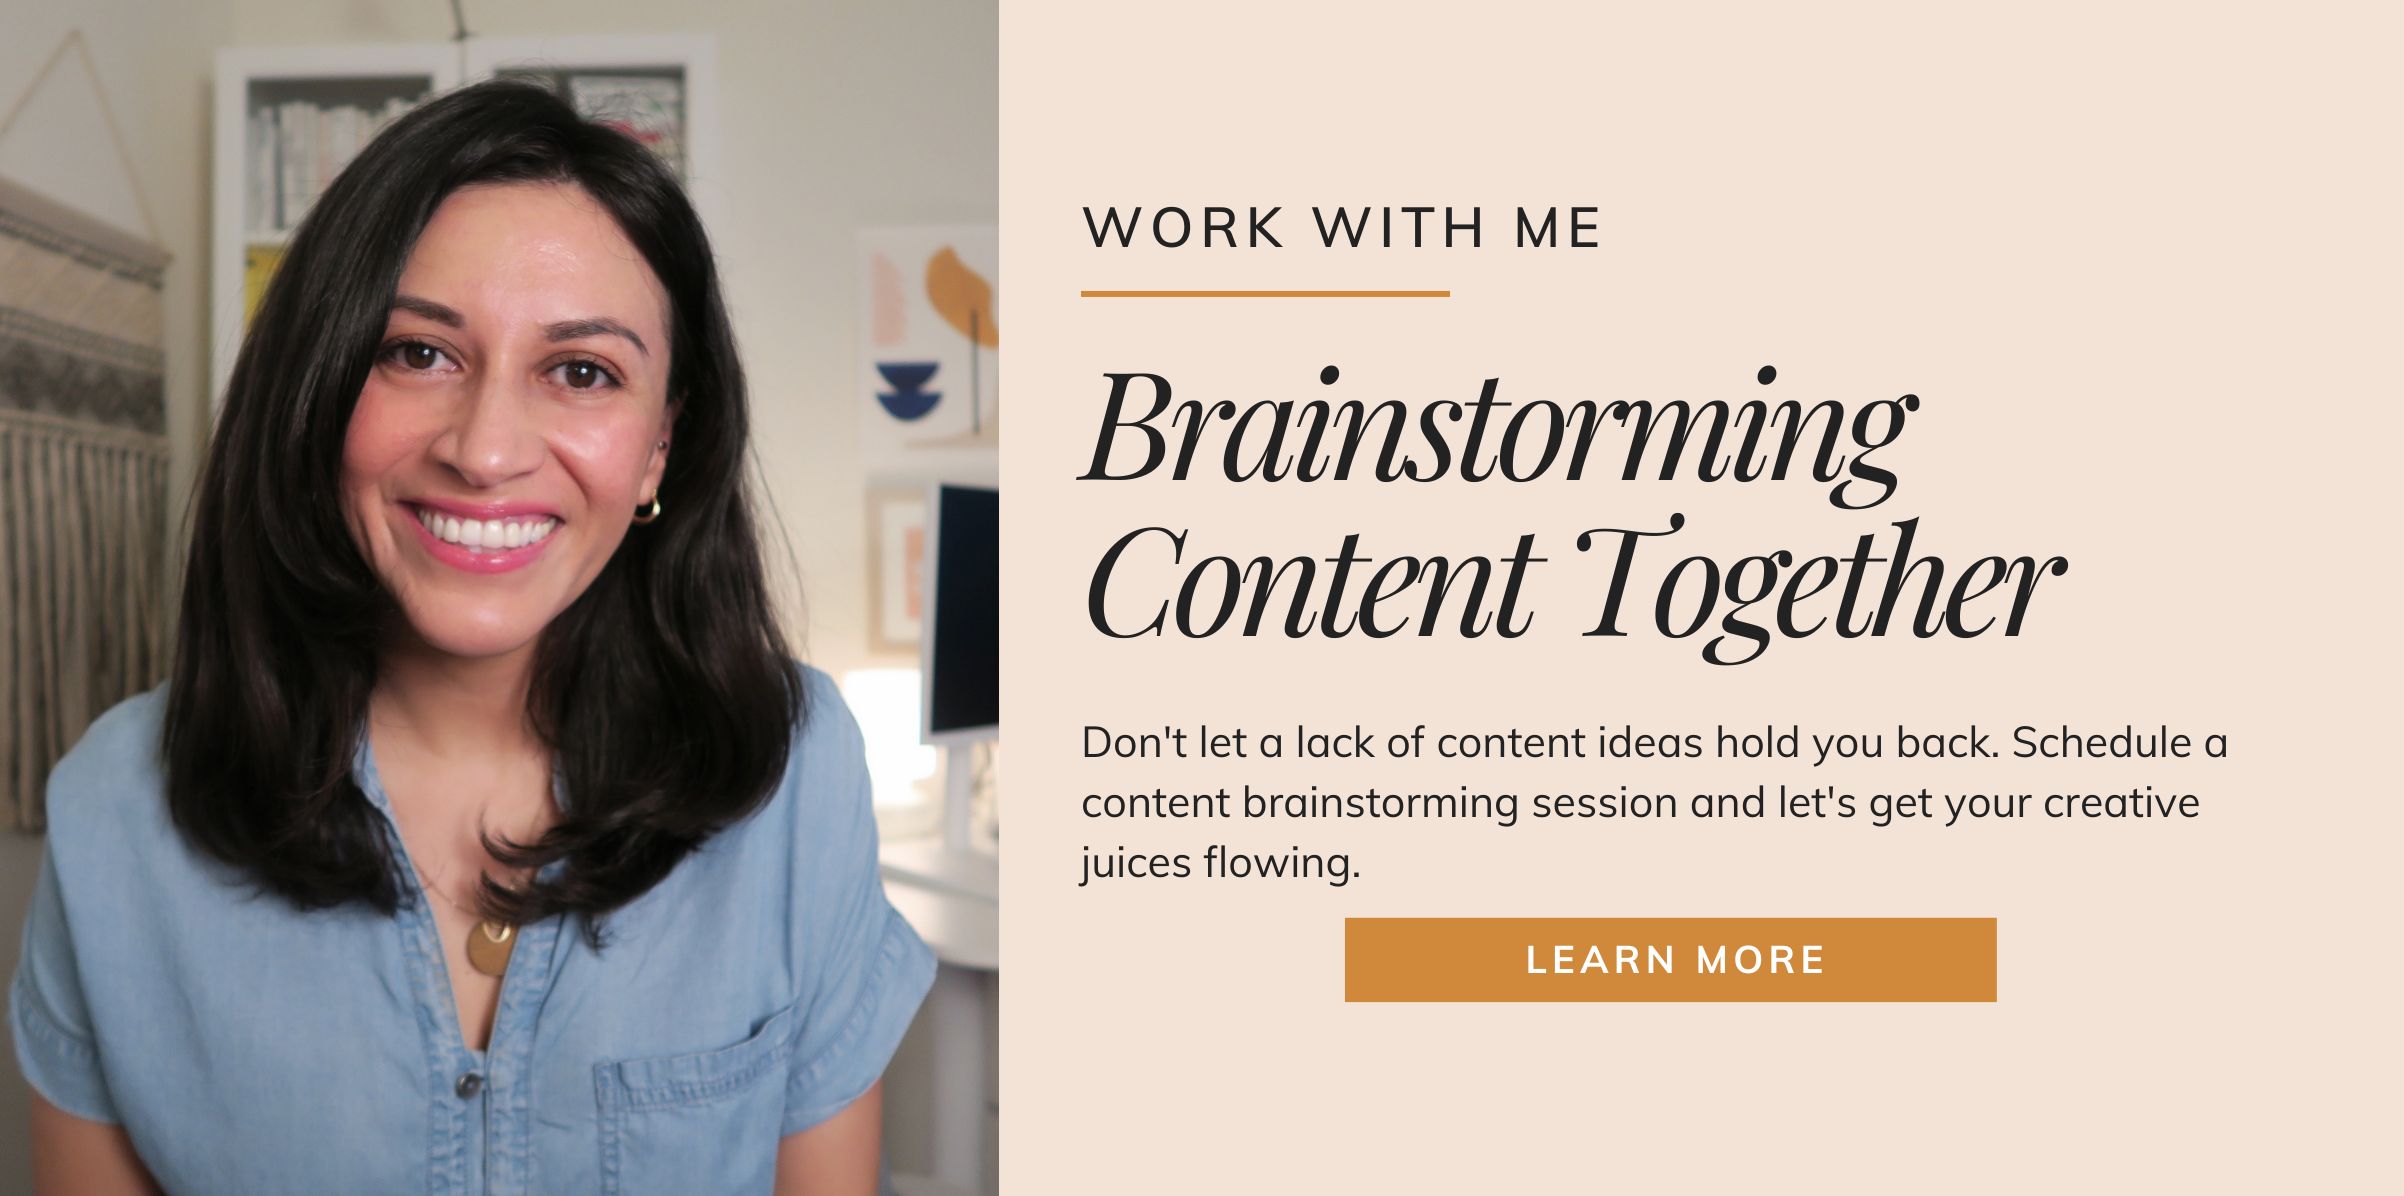 Need help developing a content plan that will drive traffic and engagement? Let's schedule a content brainstorming session and create a strategy that works for you